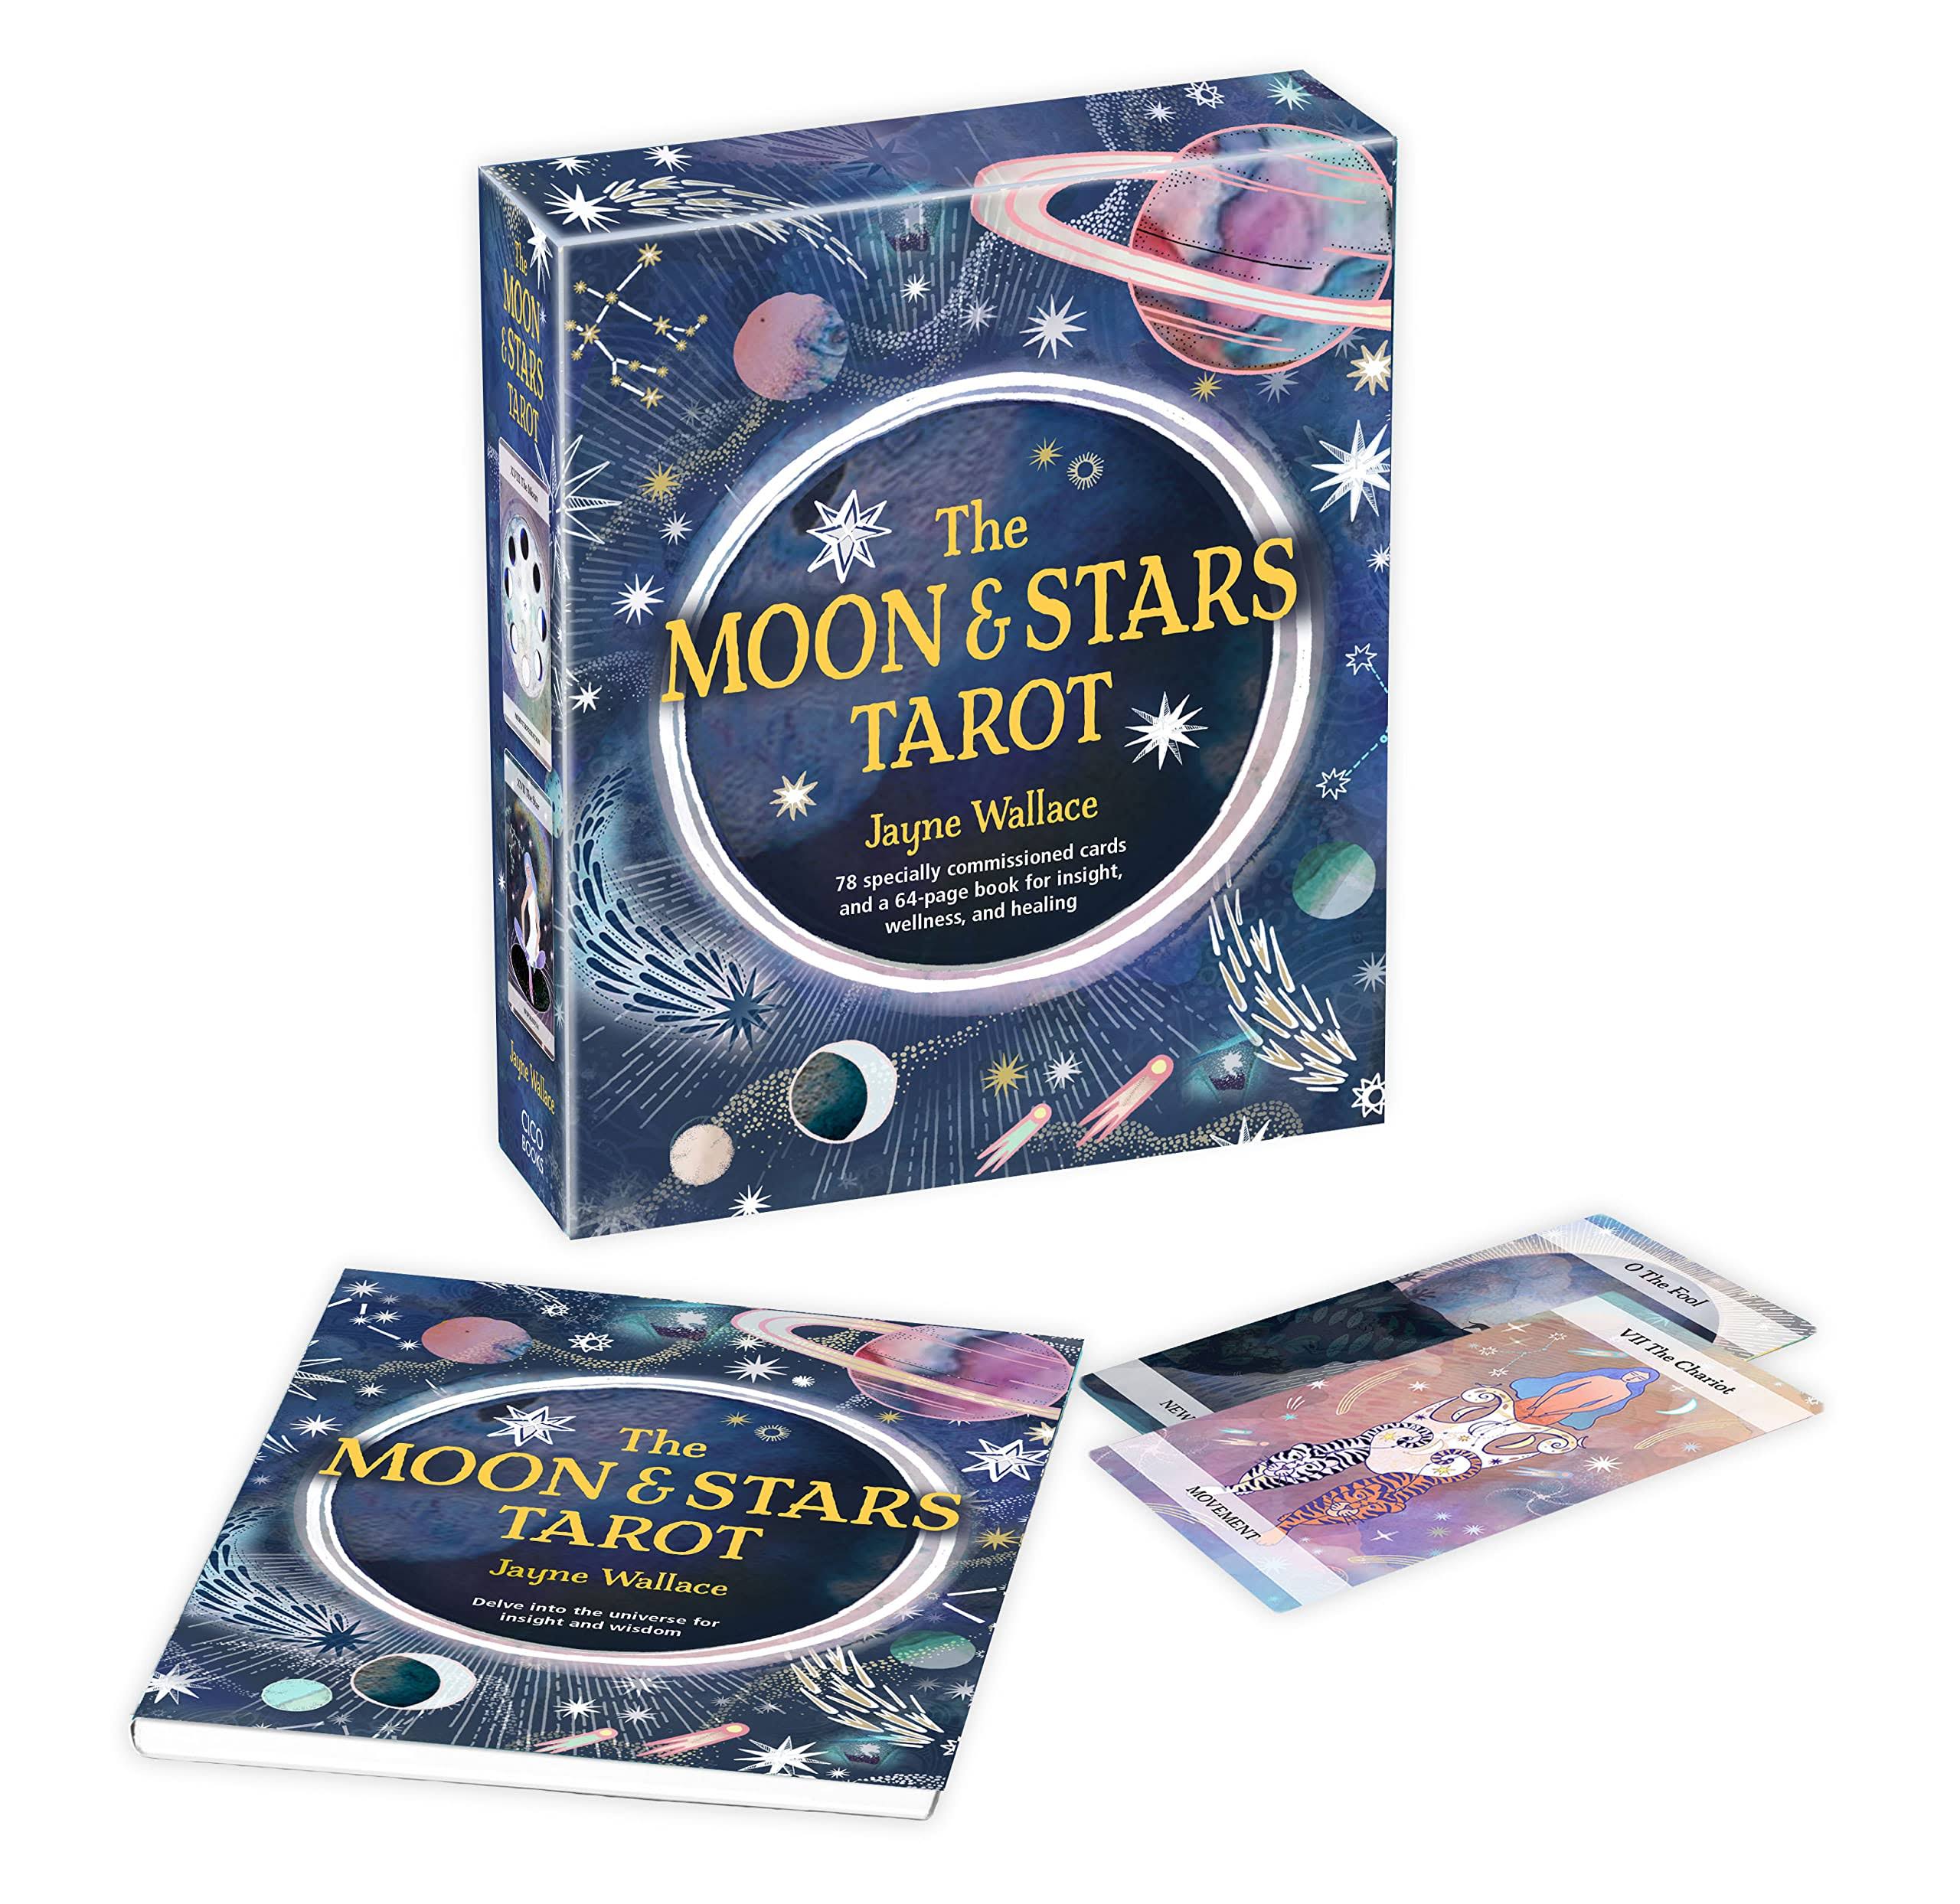 The Moon & Stars Tarot: Includes a Full Deck of 78 Specially Commissioned Tarot Cards and a 64-page Illustrated Book [Book]